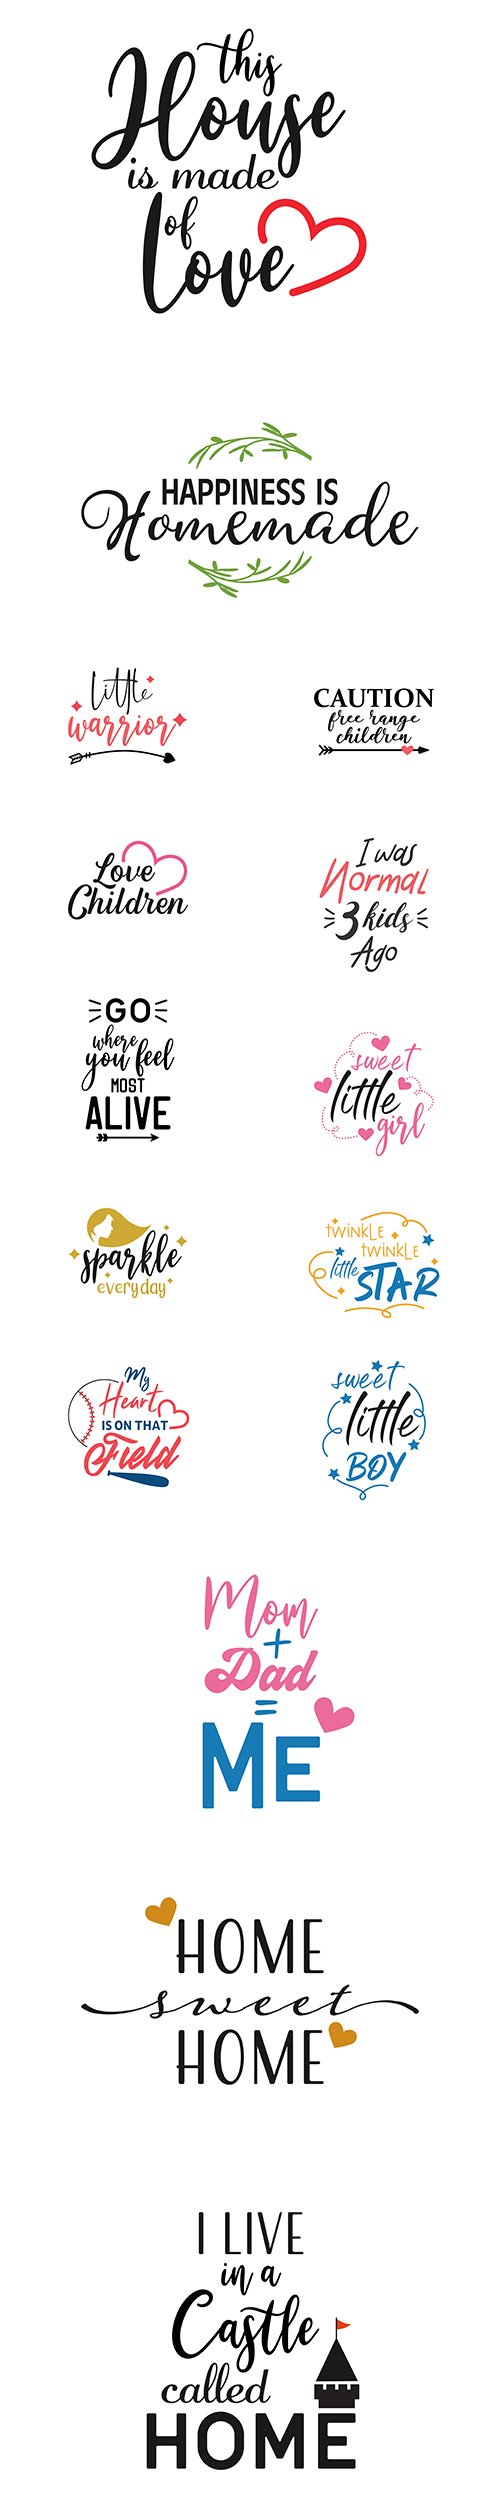 Home, Child and other Quote Lettering Typography Set